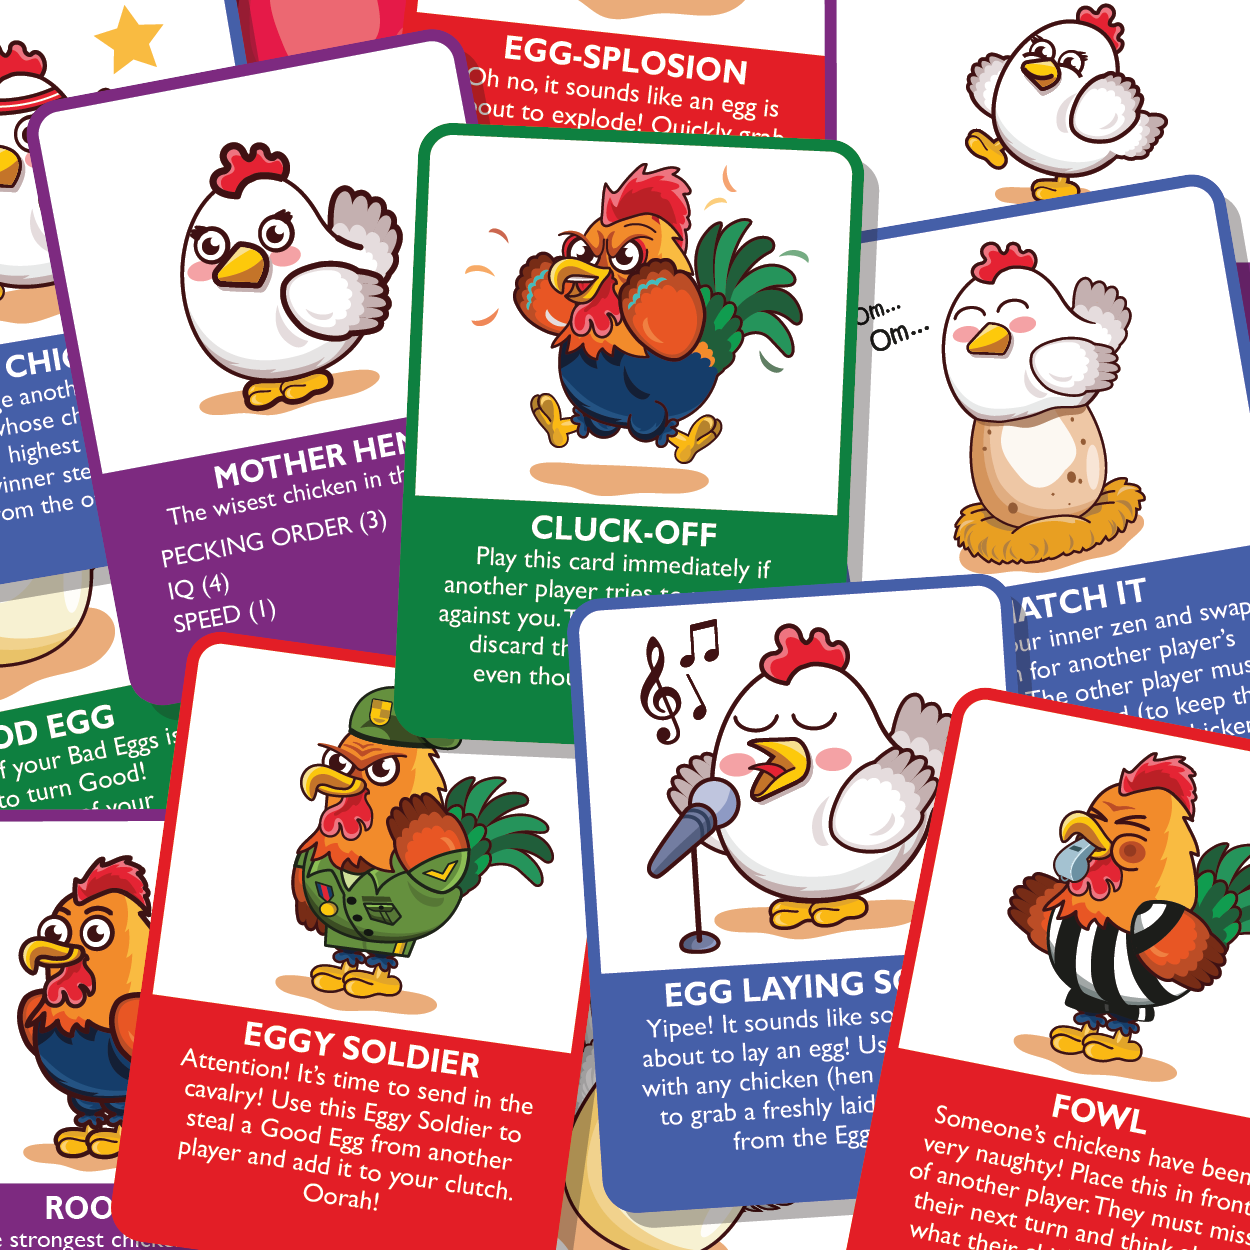 Ethical Game: Egg Bound - The hilarious chicken card game (20% OFF!)